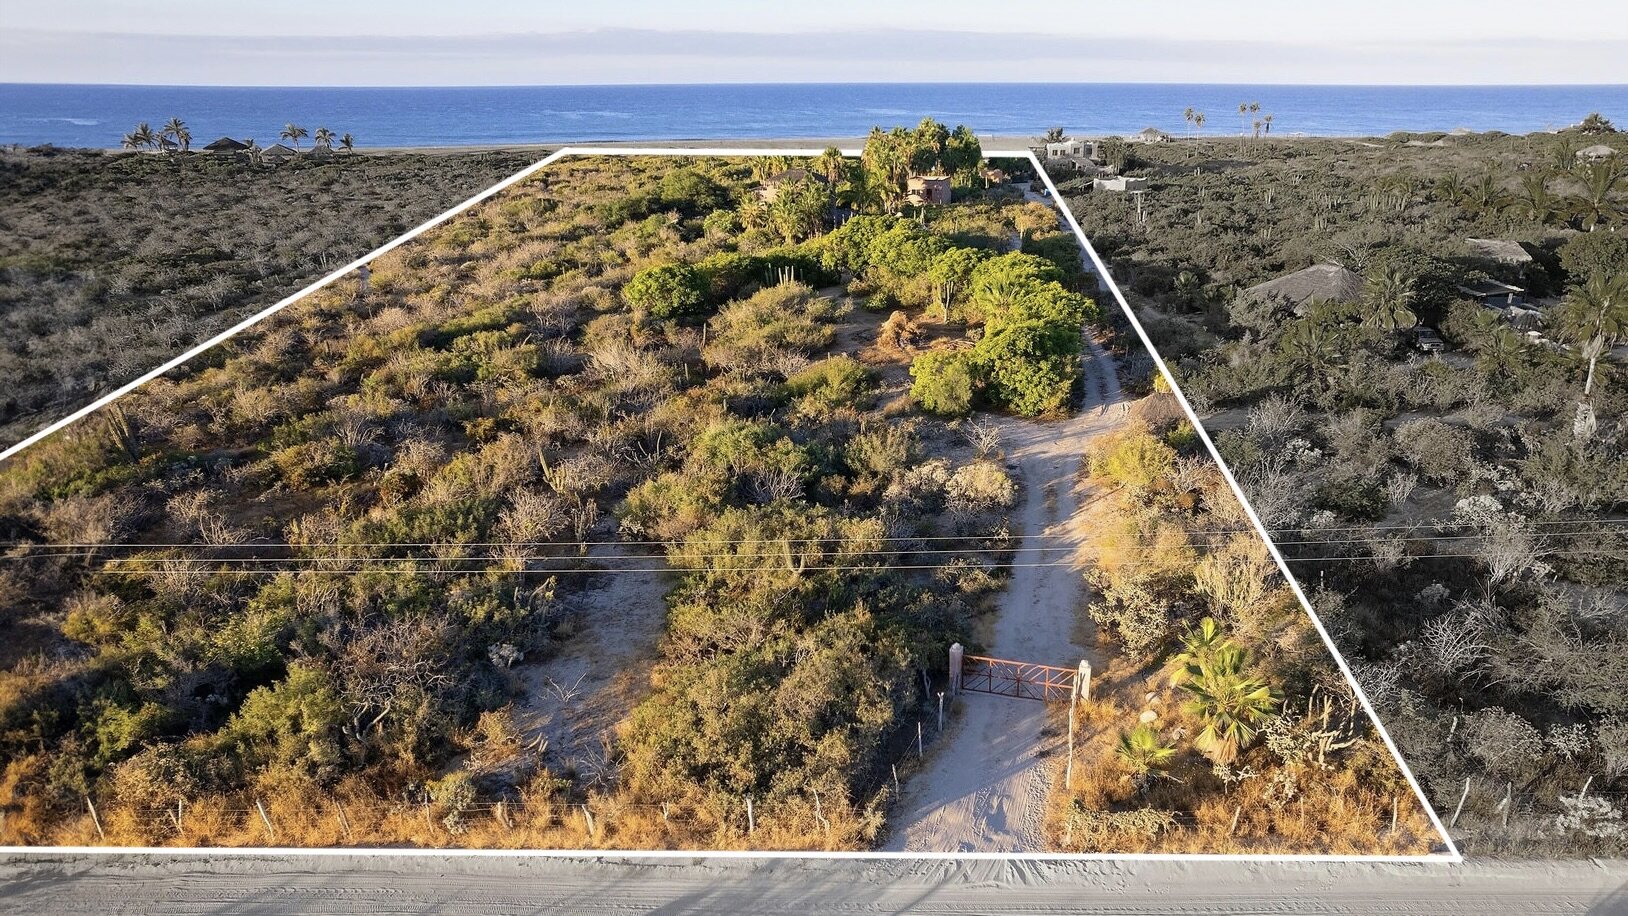 𝑳𝒂 𝑷𝒂𝒔𝒕𝒐𝒓𝒂 𝑩𝒆𝒂𝒄𝒉𝒇𝒓𝒐𝒏𝒕
Todos Santos | MLS 23-1648
USD $4,495,000 | MXN $80,910,000

Situated on Baja California's idyllic Pacific coast, just minutes north of Todos Santos, this 7.6-acre oceanfront parcel awaits a developer's keen v